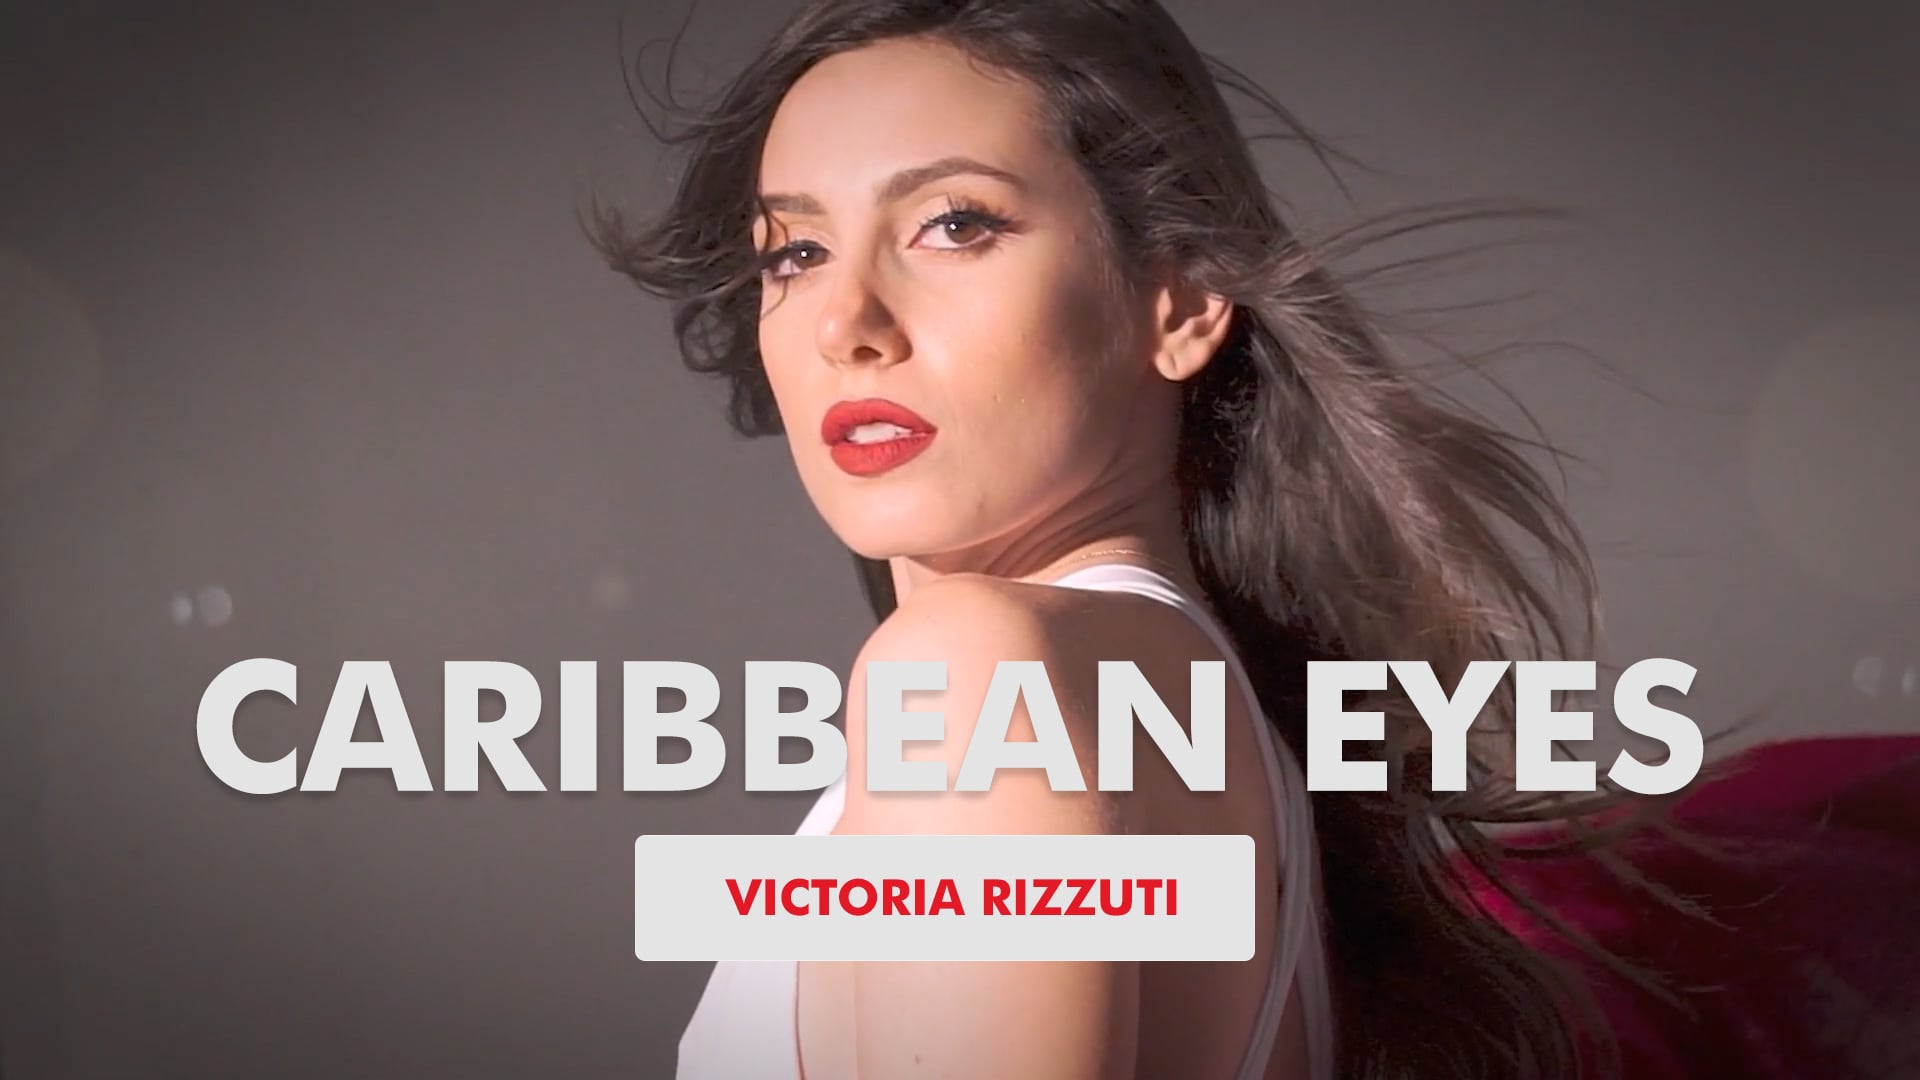 VICTORIA RIZZUTI: "Caribbean Eyes" Commercial (Part I)